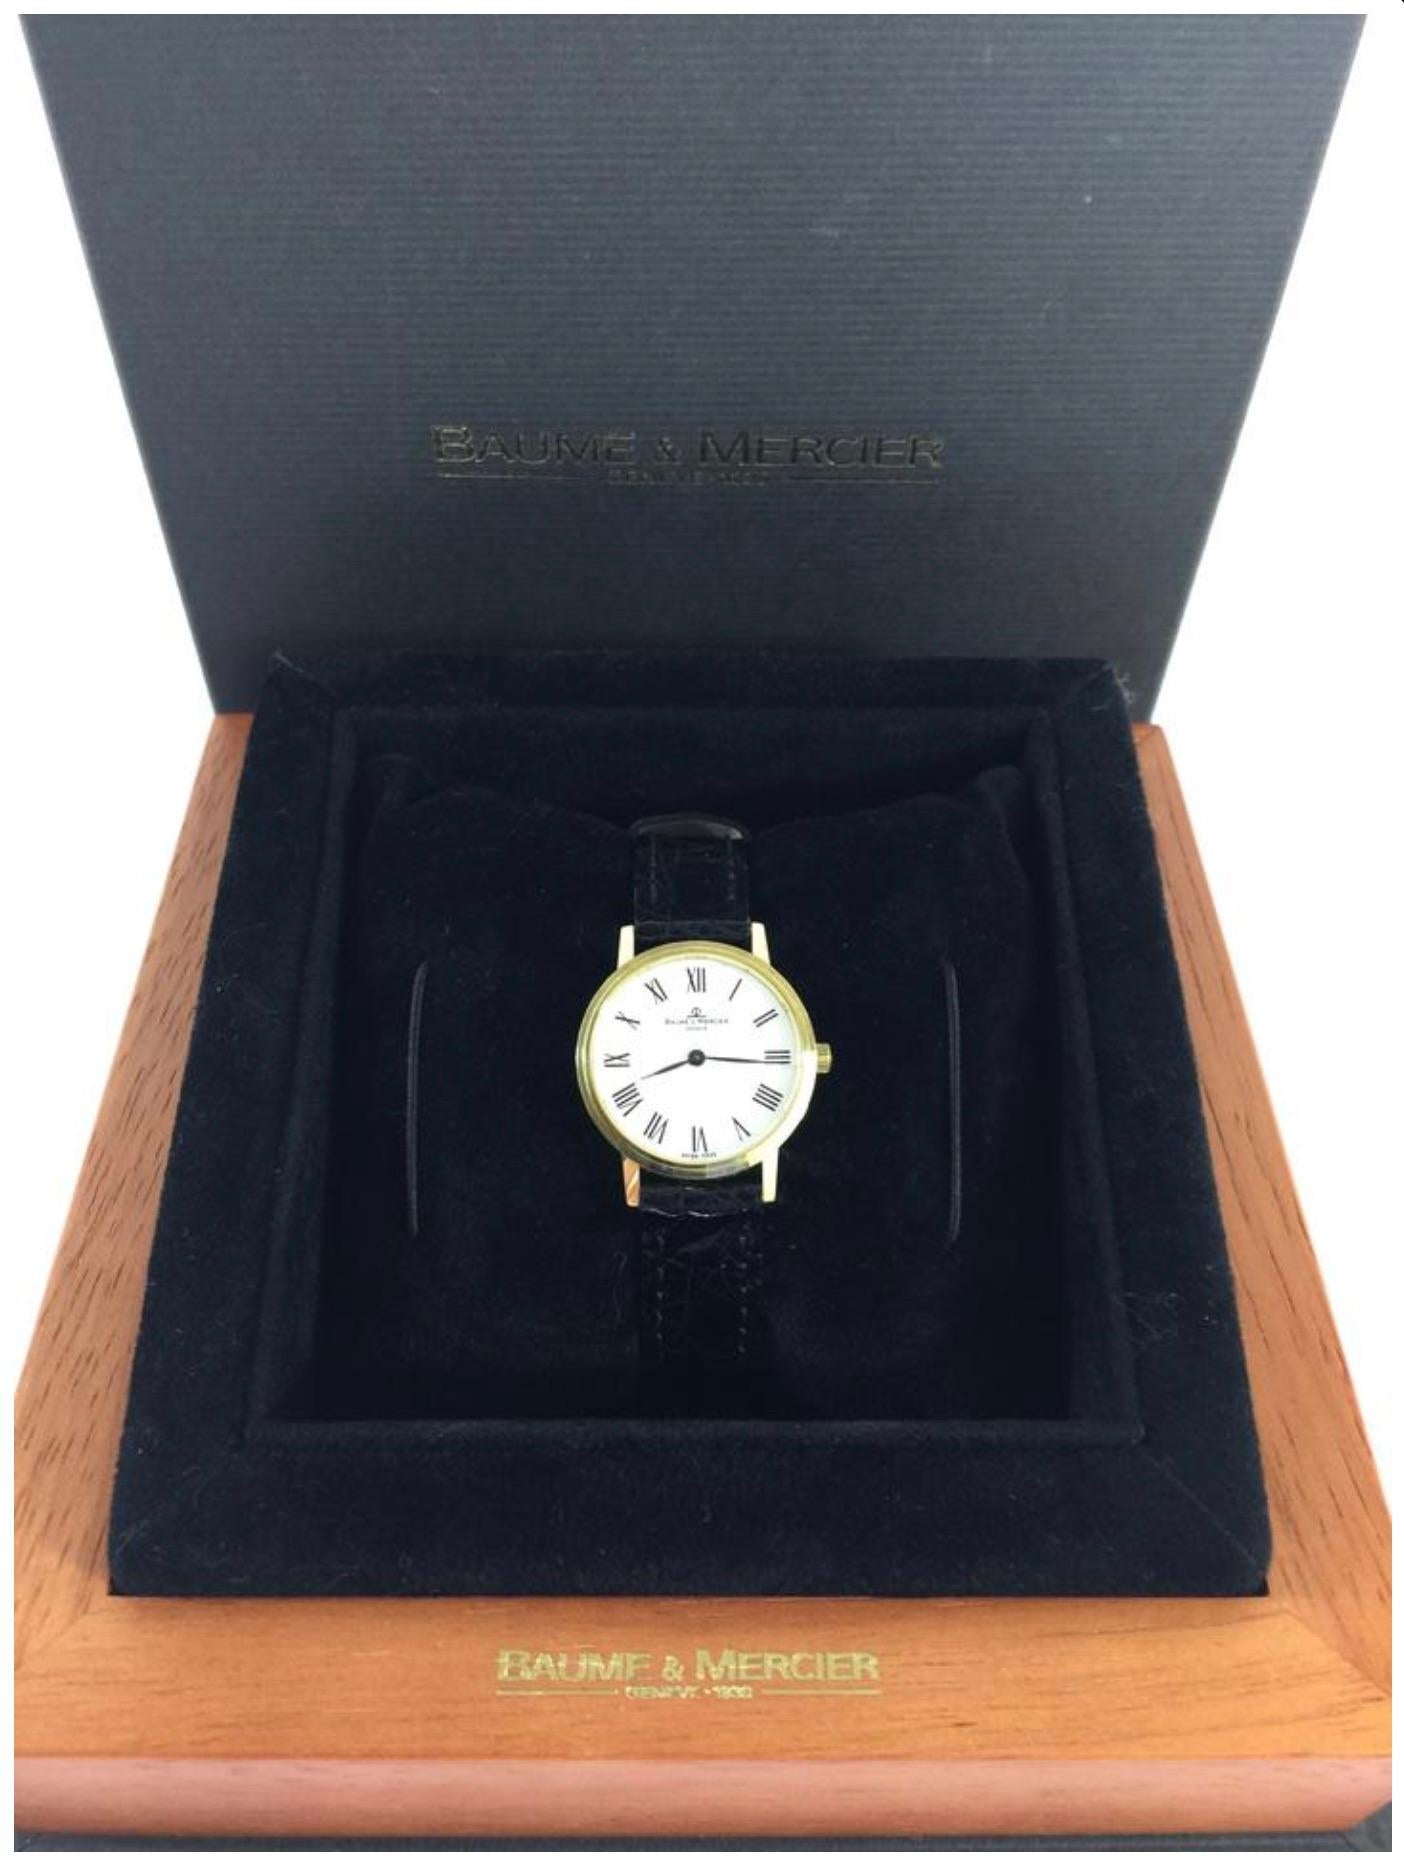 Model - Baume and Mercier Ladies 18K Yellow Gold Watch

Condition - Exceptional! No scratching on crystal or watch and no wear on wrist strap.

SKU - 910

Original Retail Price - $3,000 + tax (Approx.)

Material - 18k Yellow Gold

Dimensions - 24mm